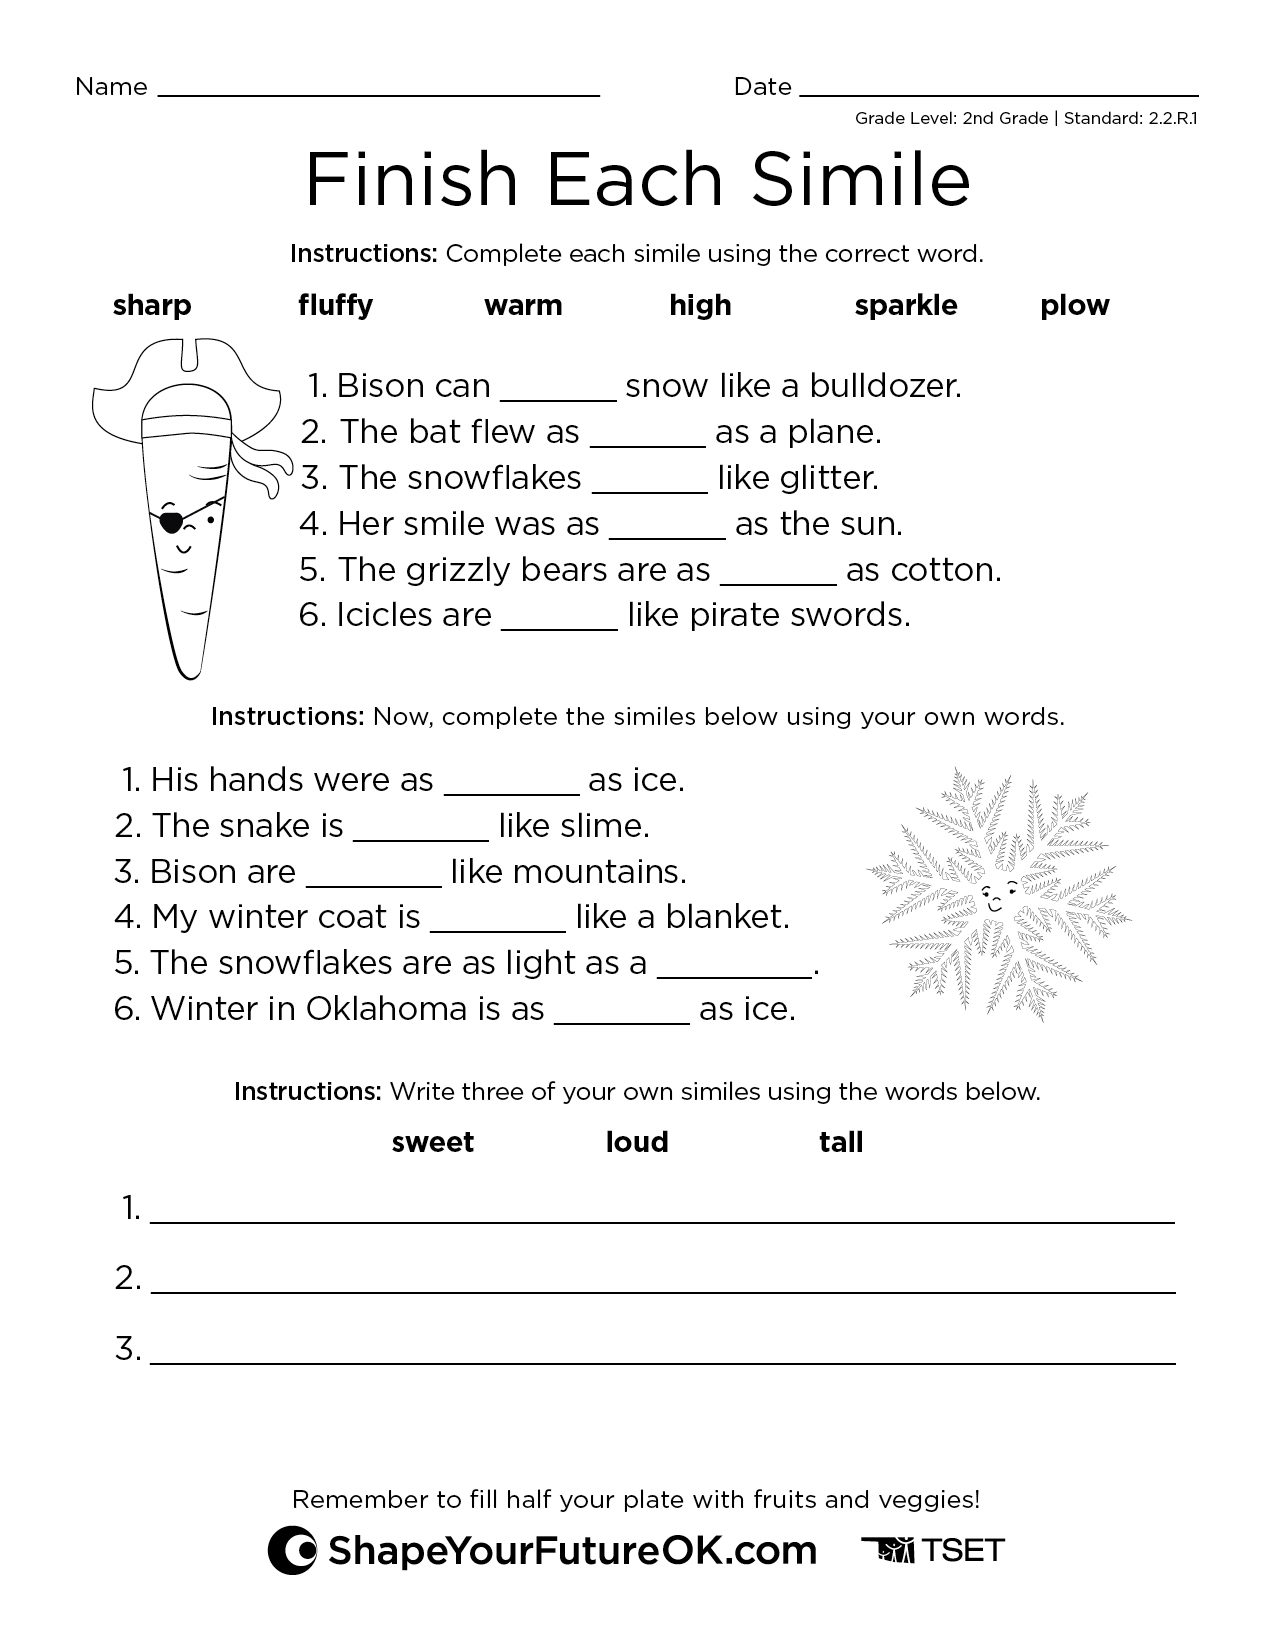 Finish Each Simile Download